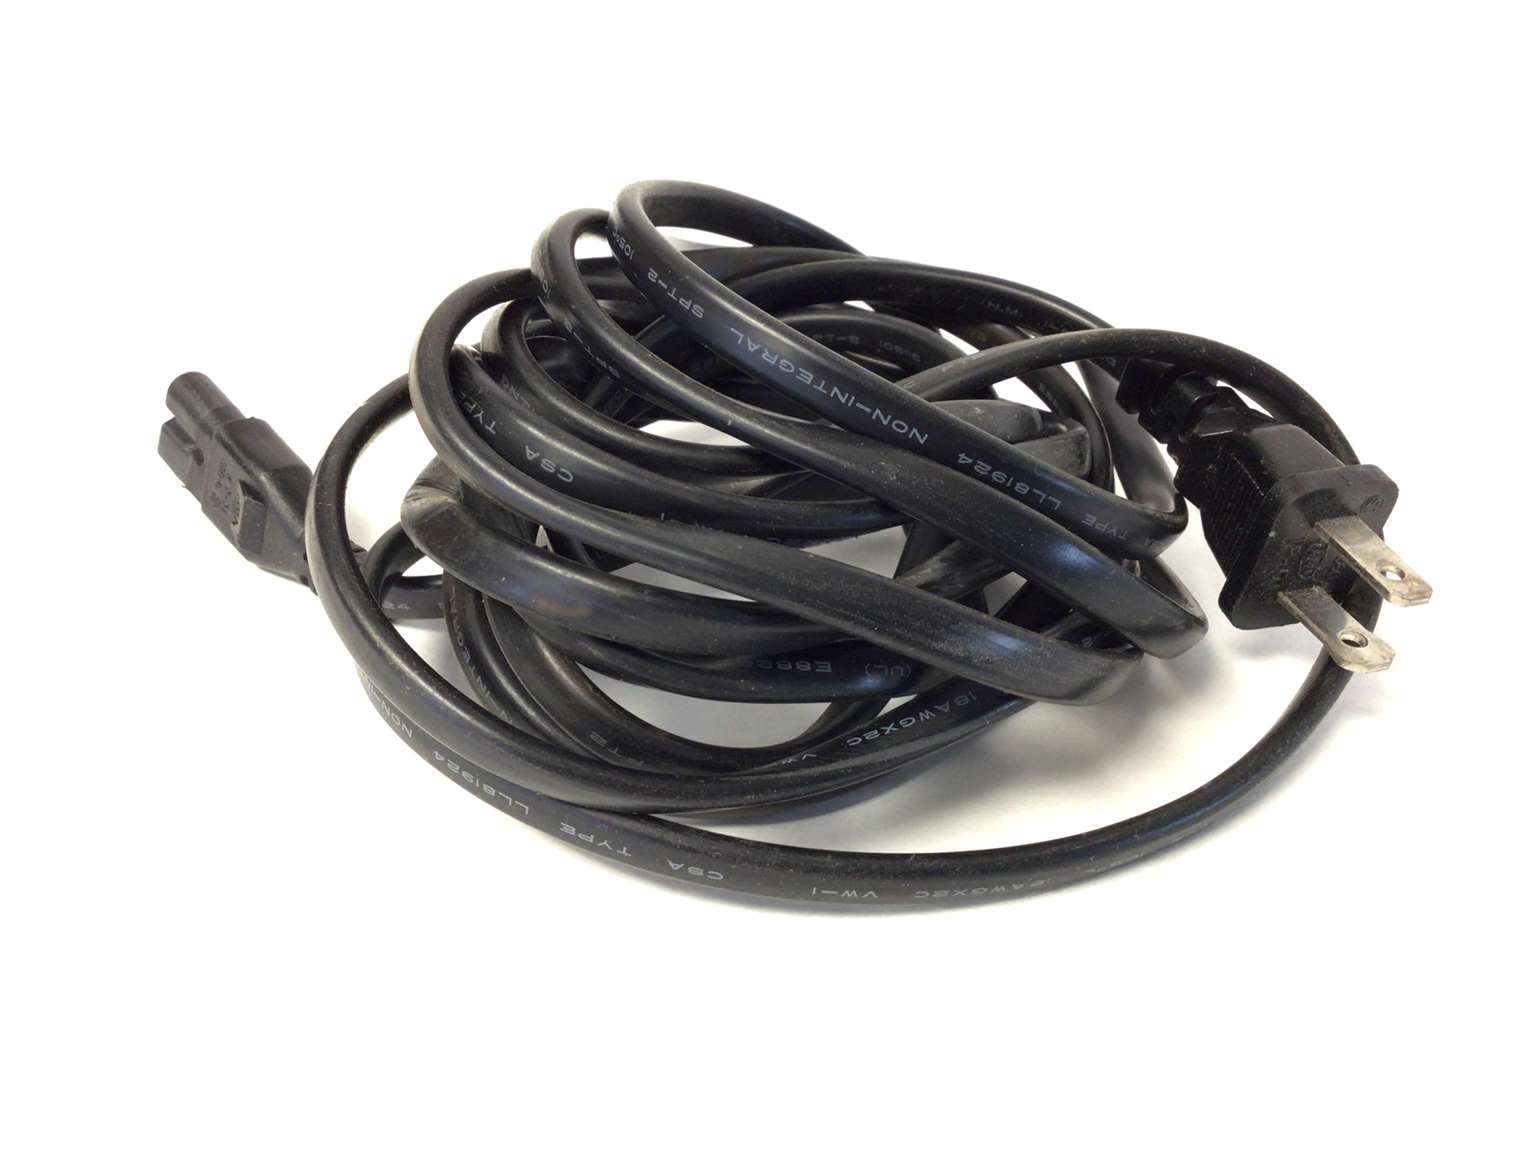 Star Trac PvS TV 120v Line Cord For Power Supply Adapter (Used)